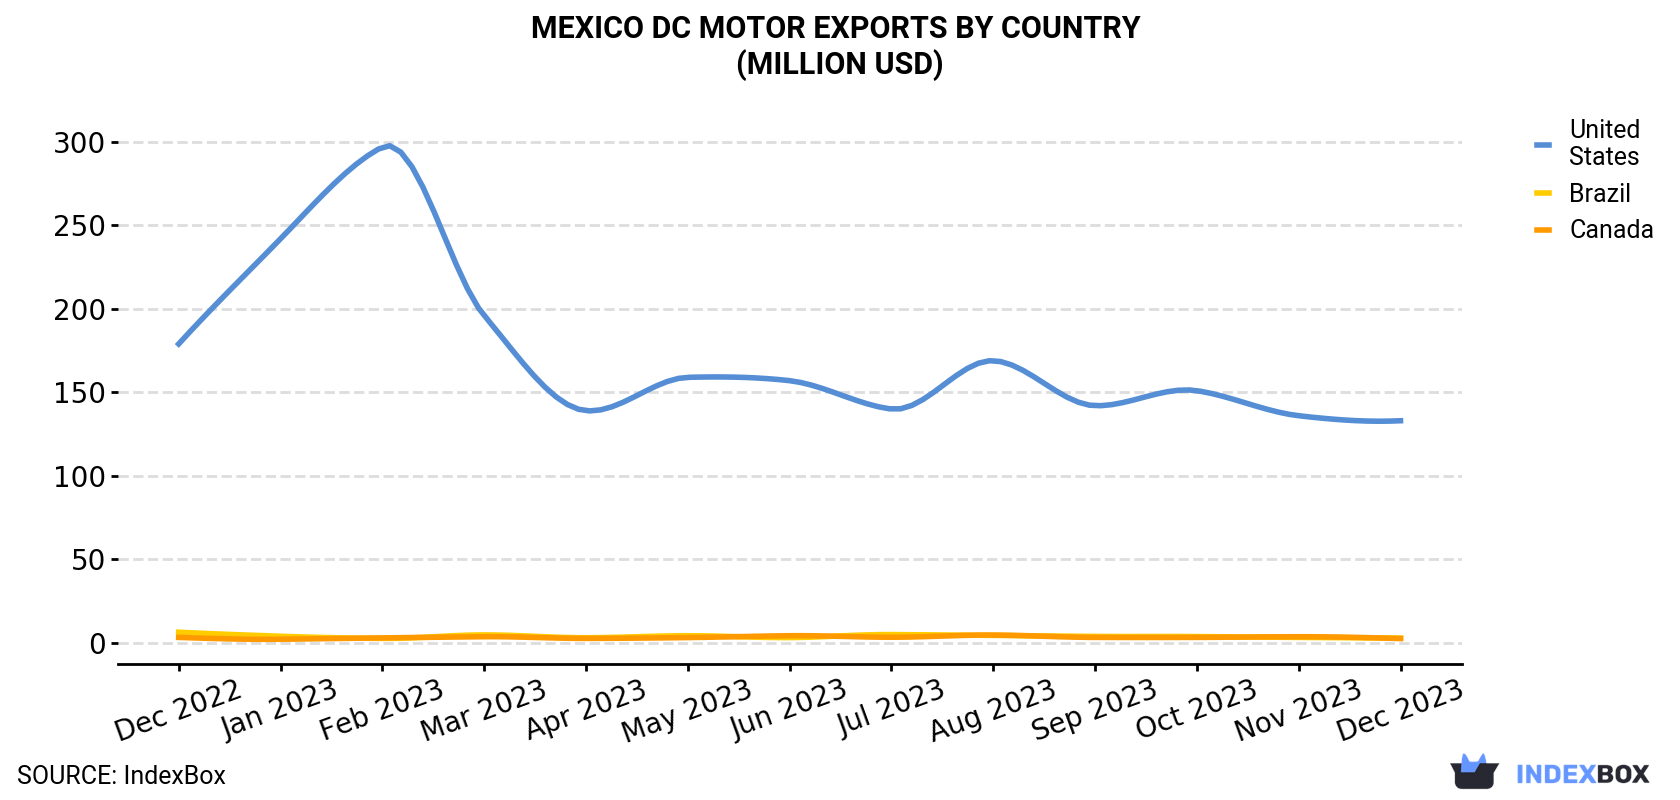 Mexico DC Motor Exports By Country (Million USD)